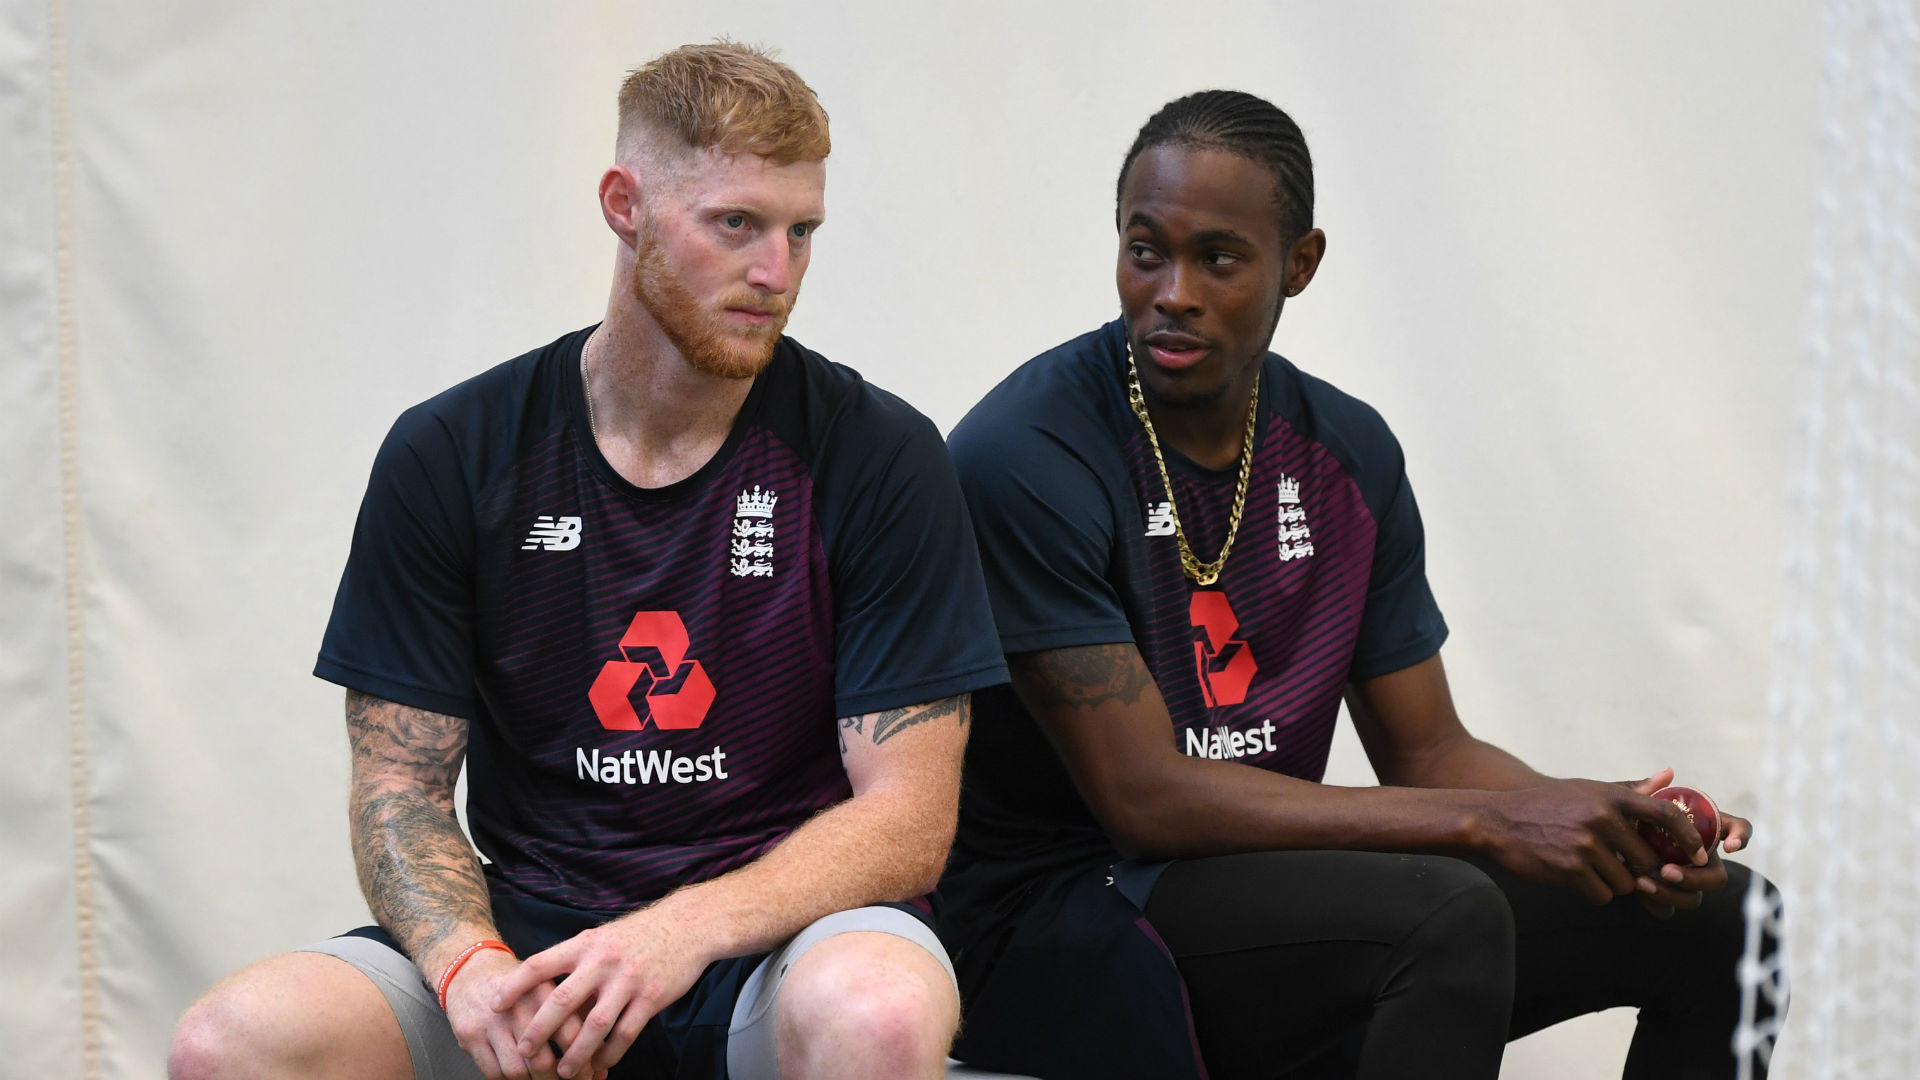 England all-rounder Ben Stokes was relieved to see Steve Smith unharmed but expects Australia to come in for more Jofra Archer treatment.